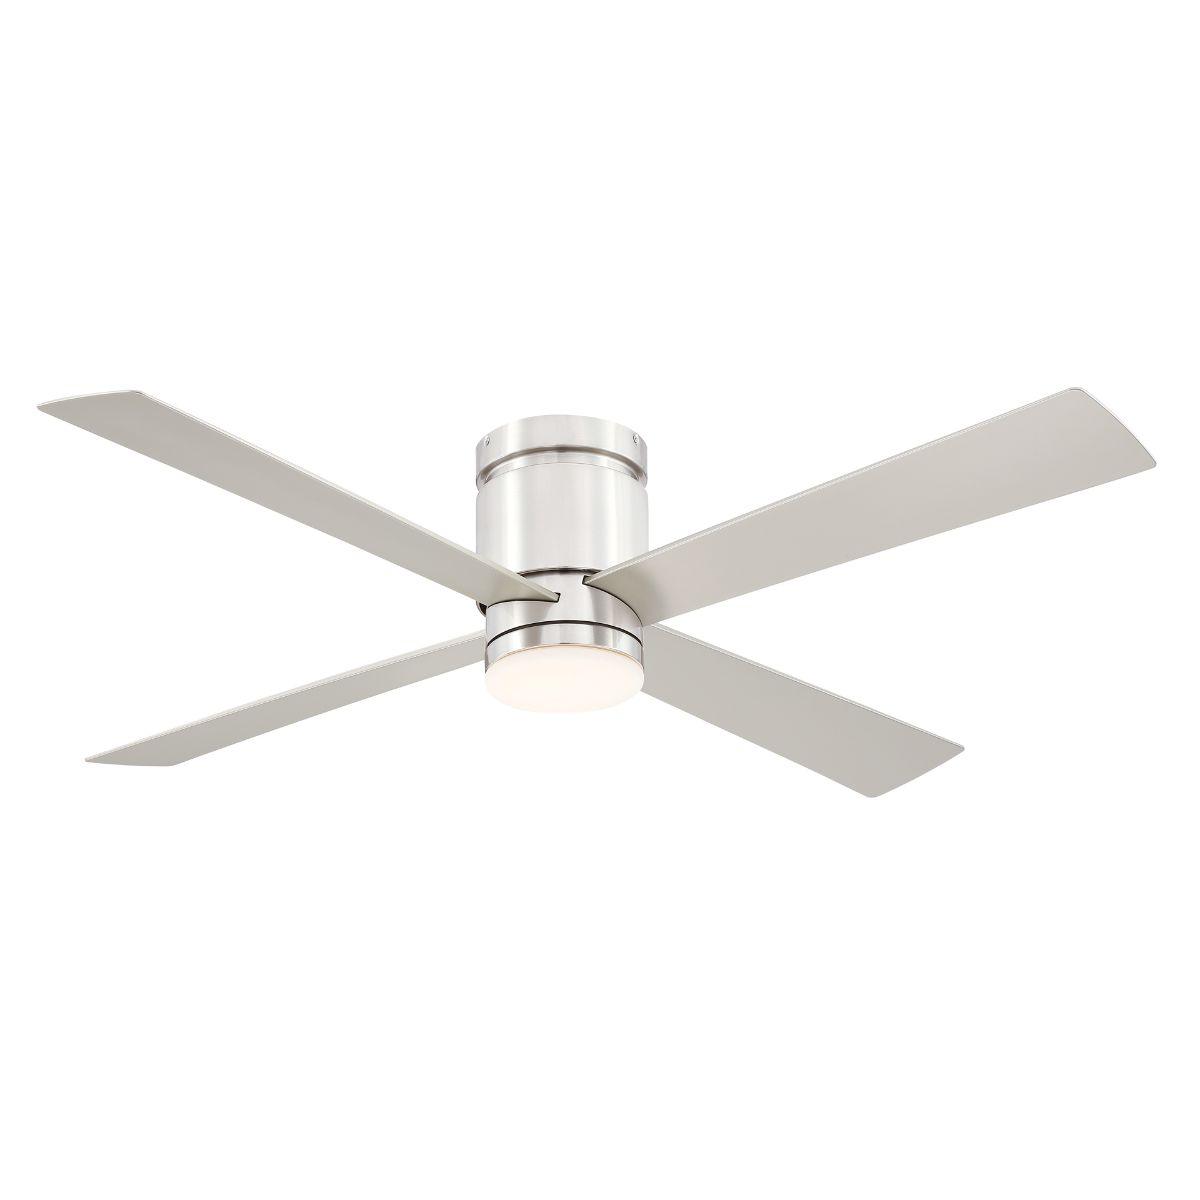 Kwartet 52 In. Low Profile Outdoor Ceiling Fan With CCT Select Light Kit and Remote